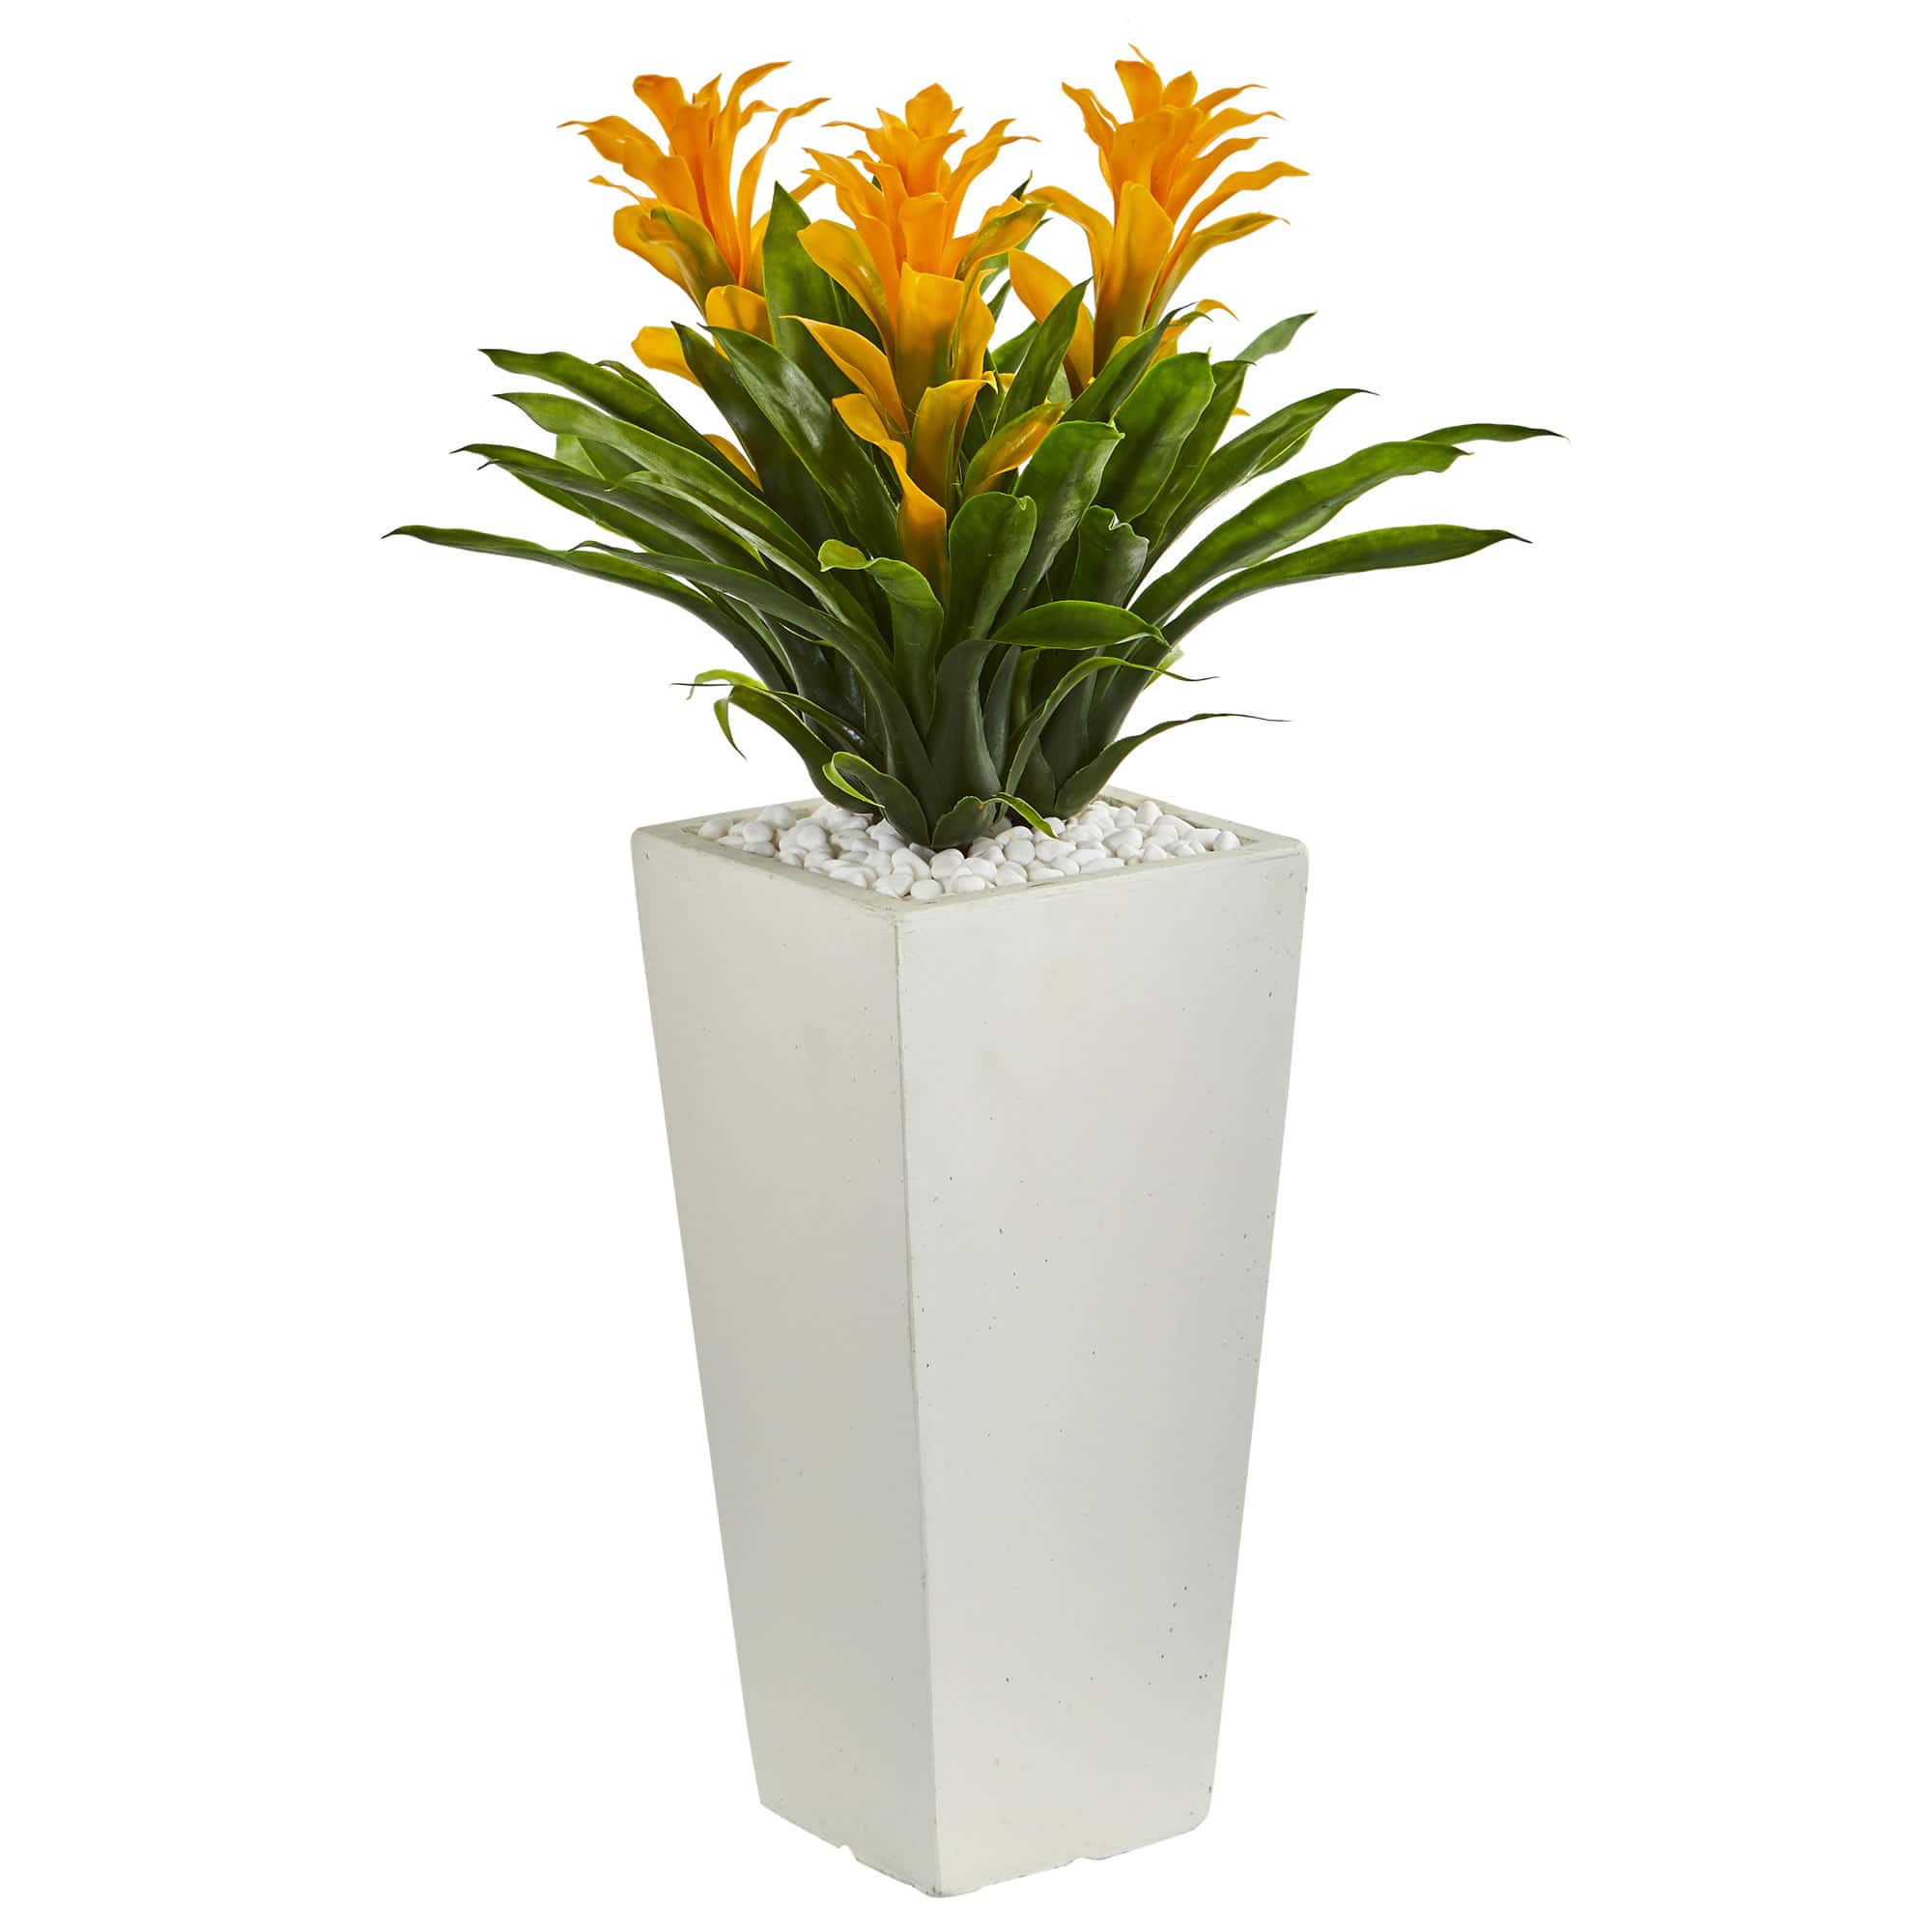 2ft. Triple Bromeliad Plant in White Tower Planter